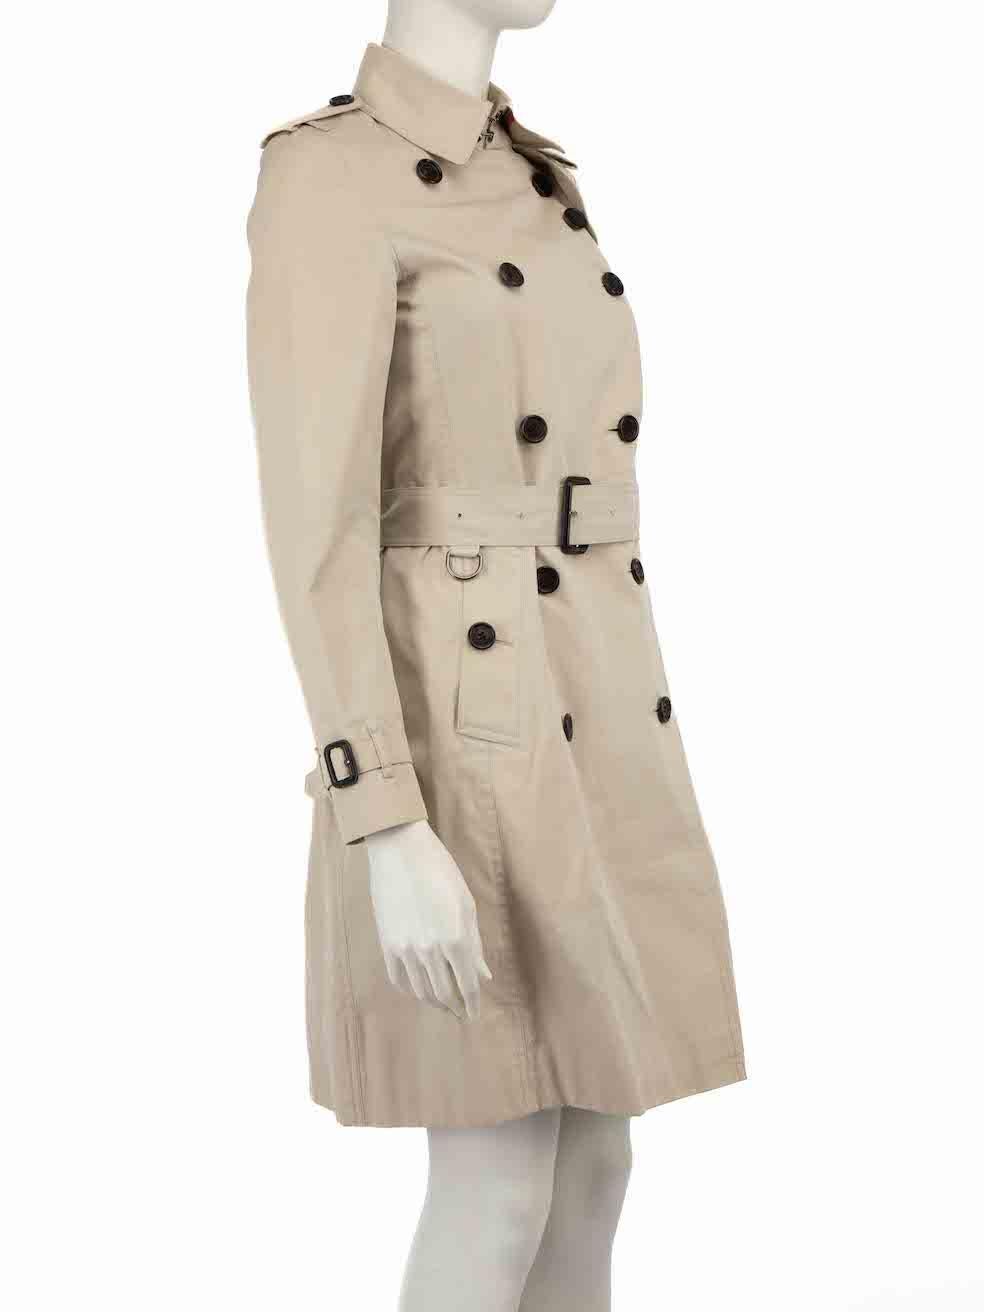 CONDITION is Very good. Minimal wear to coat. A small abrasion and some discolouration to belt edge and inside neck on this used Burberry Brit designer resale item.
 
 
 
 Details
 
 
 Red
 
 Nylon
 
 Waterproof trench coat
 
 Mid length
 
 Double